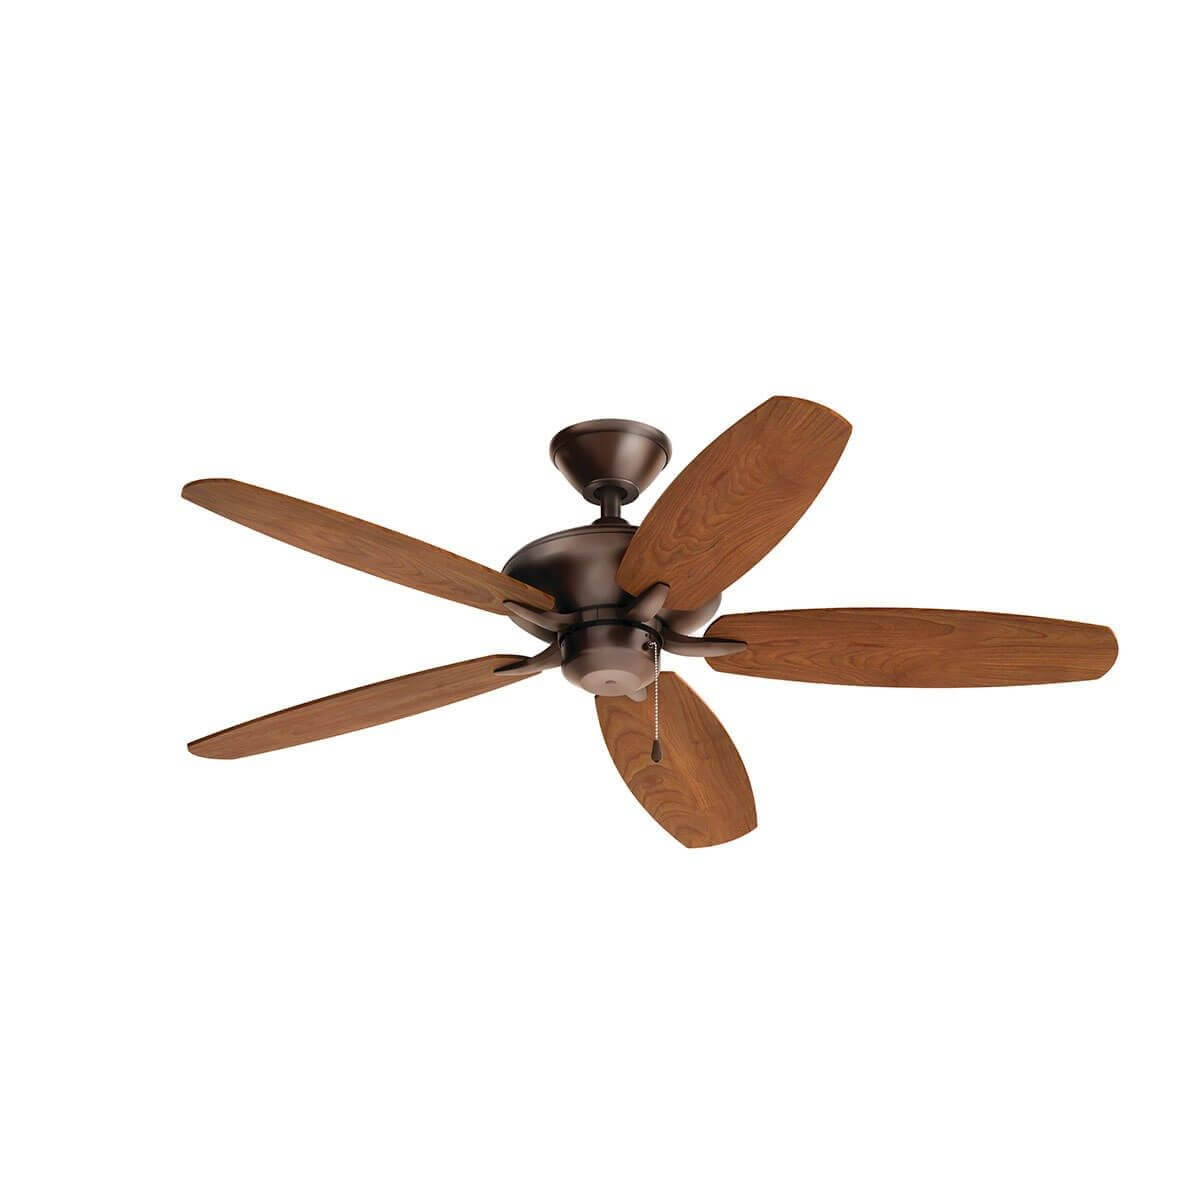 Lynndale 52 Inch Ceiling Fan - Oil Brushed Bronze with Walnut-Cherry Blade